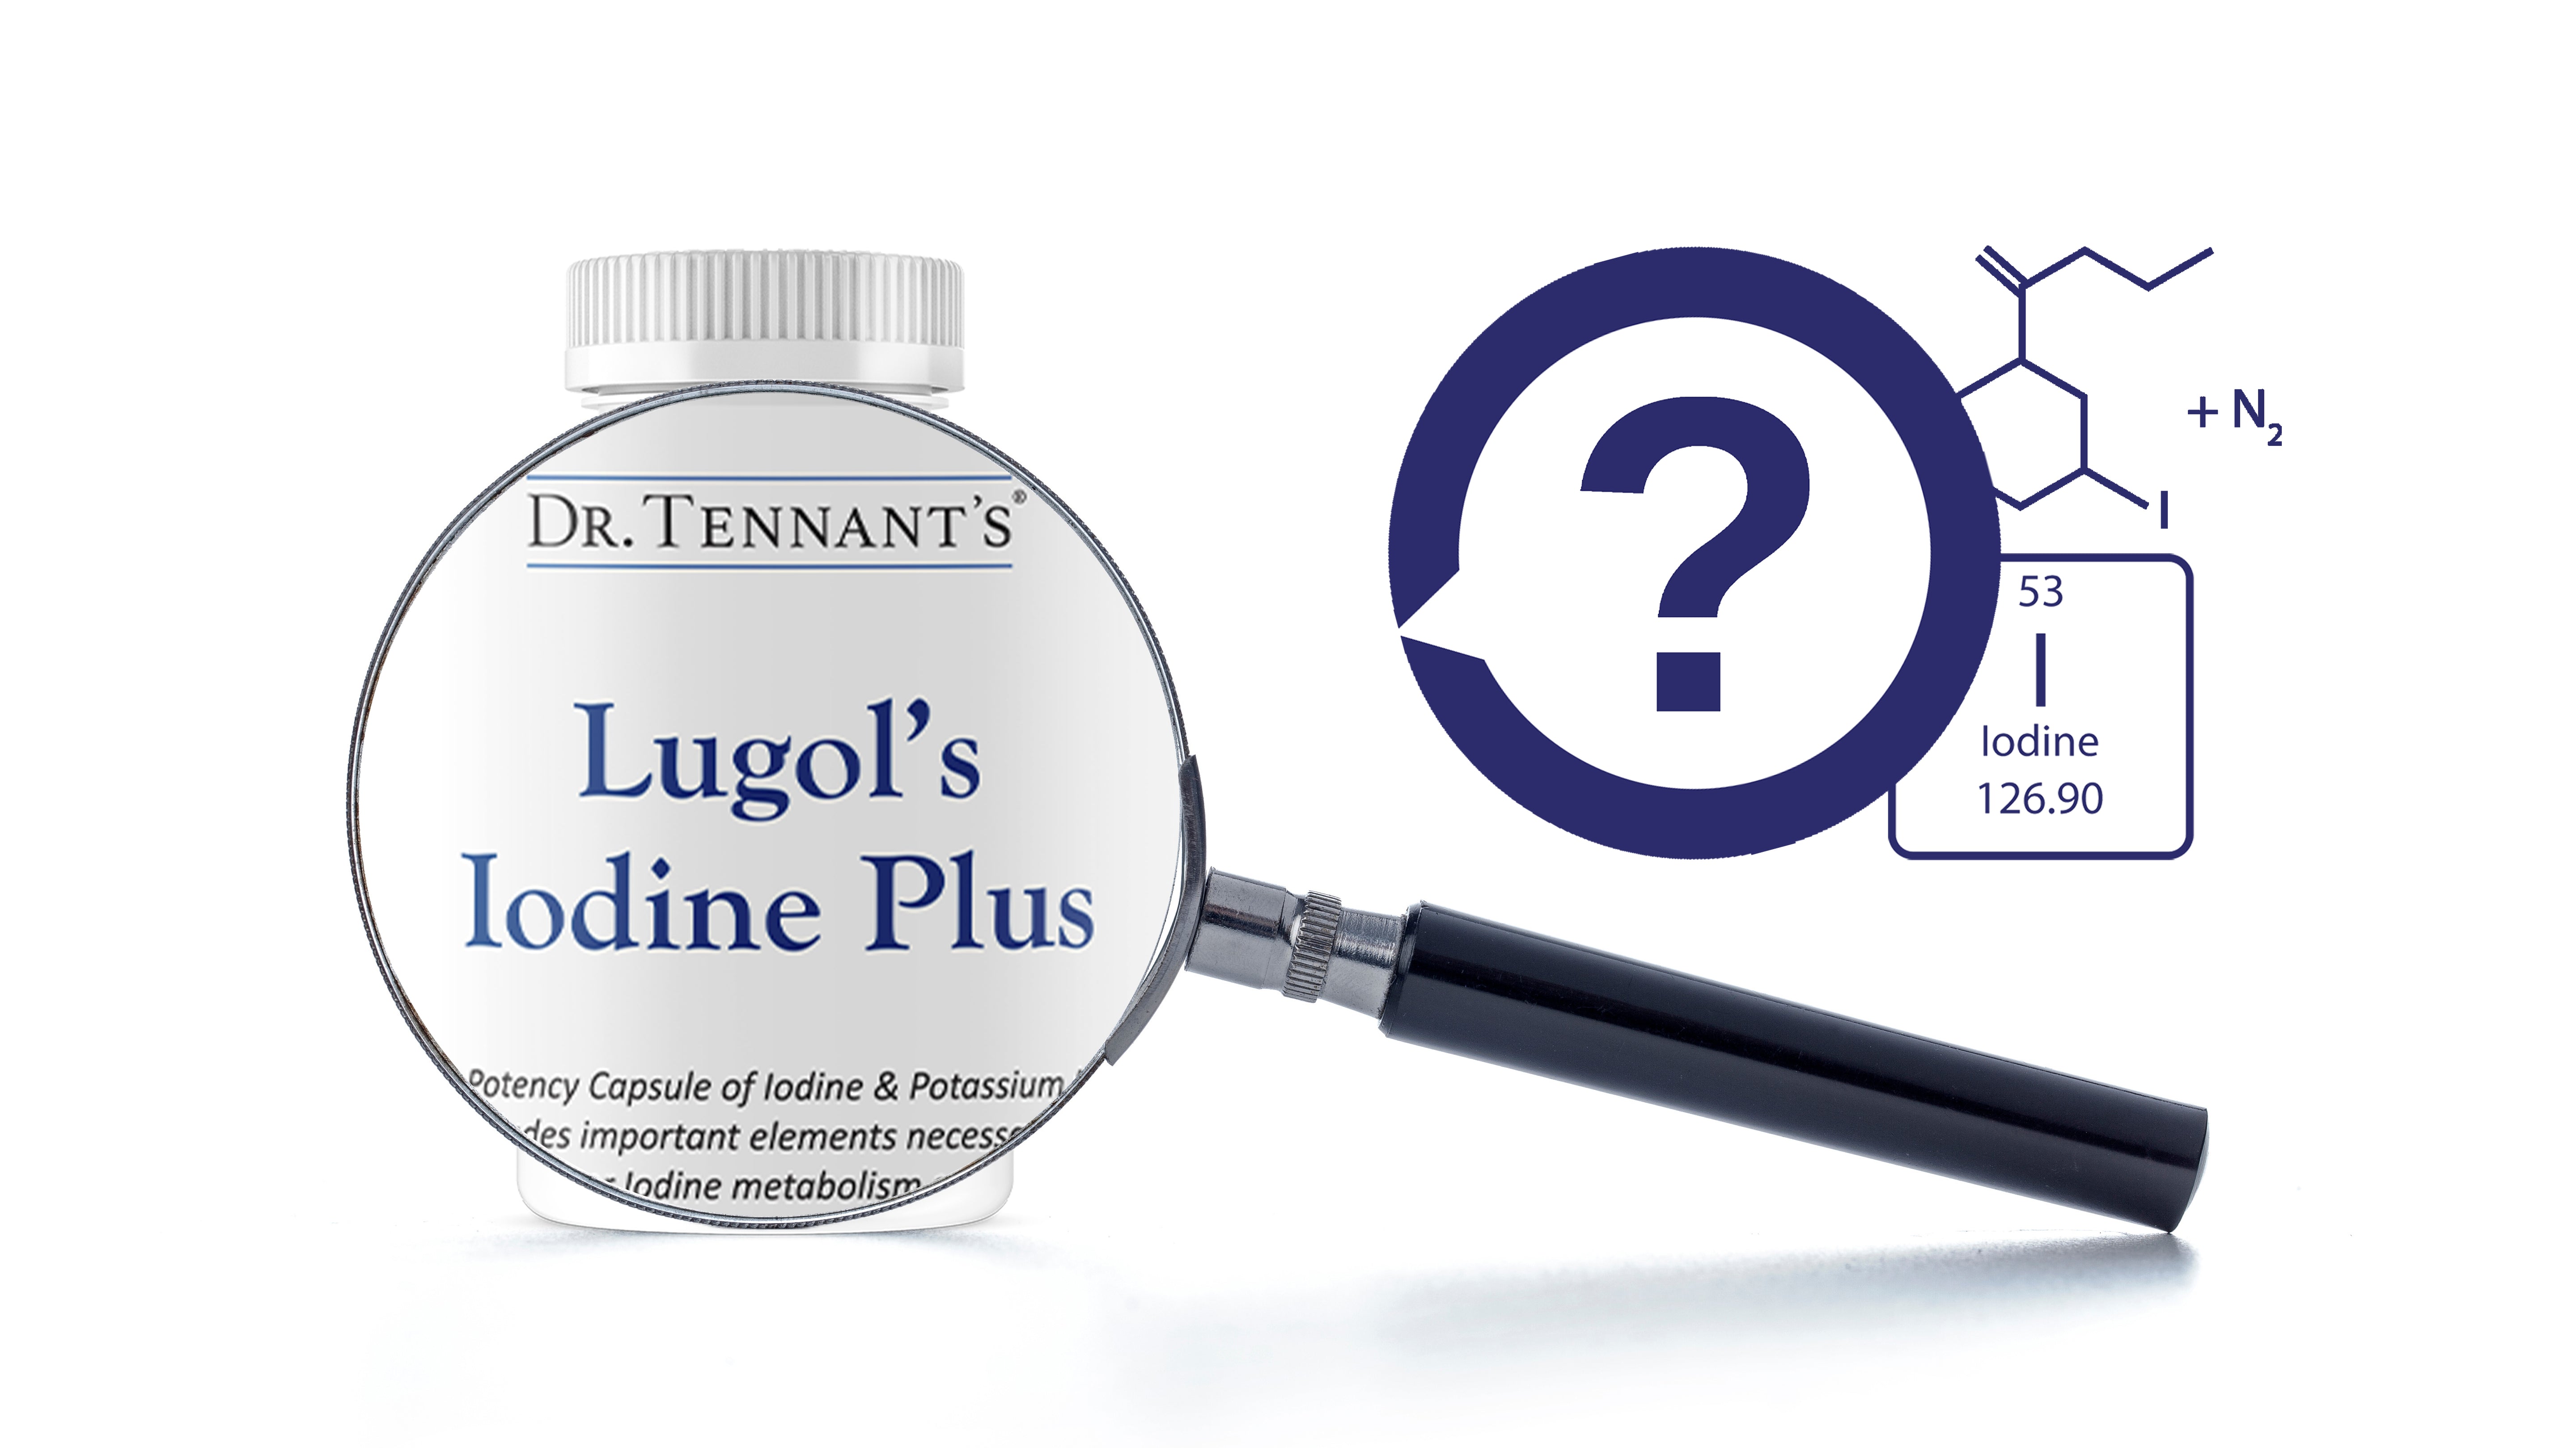 Why Lugol's Iodine? A Critical Mineral for Your Health